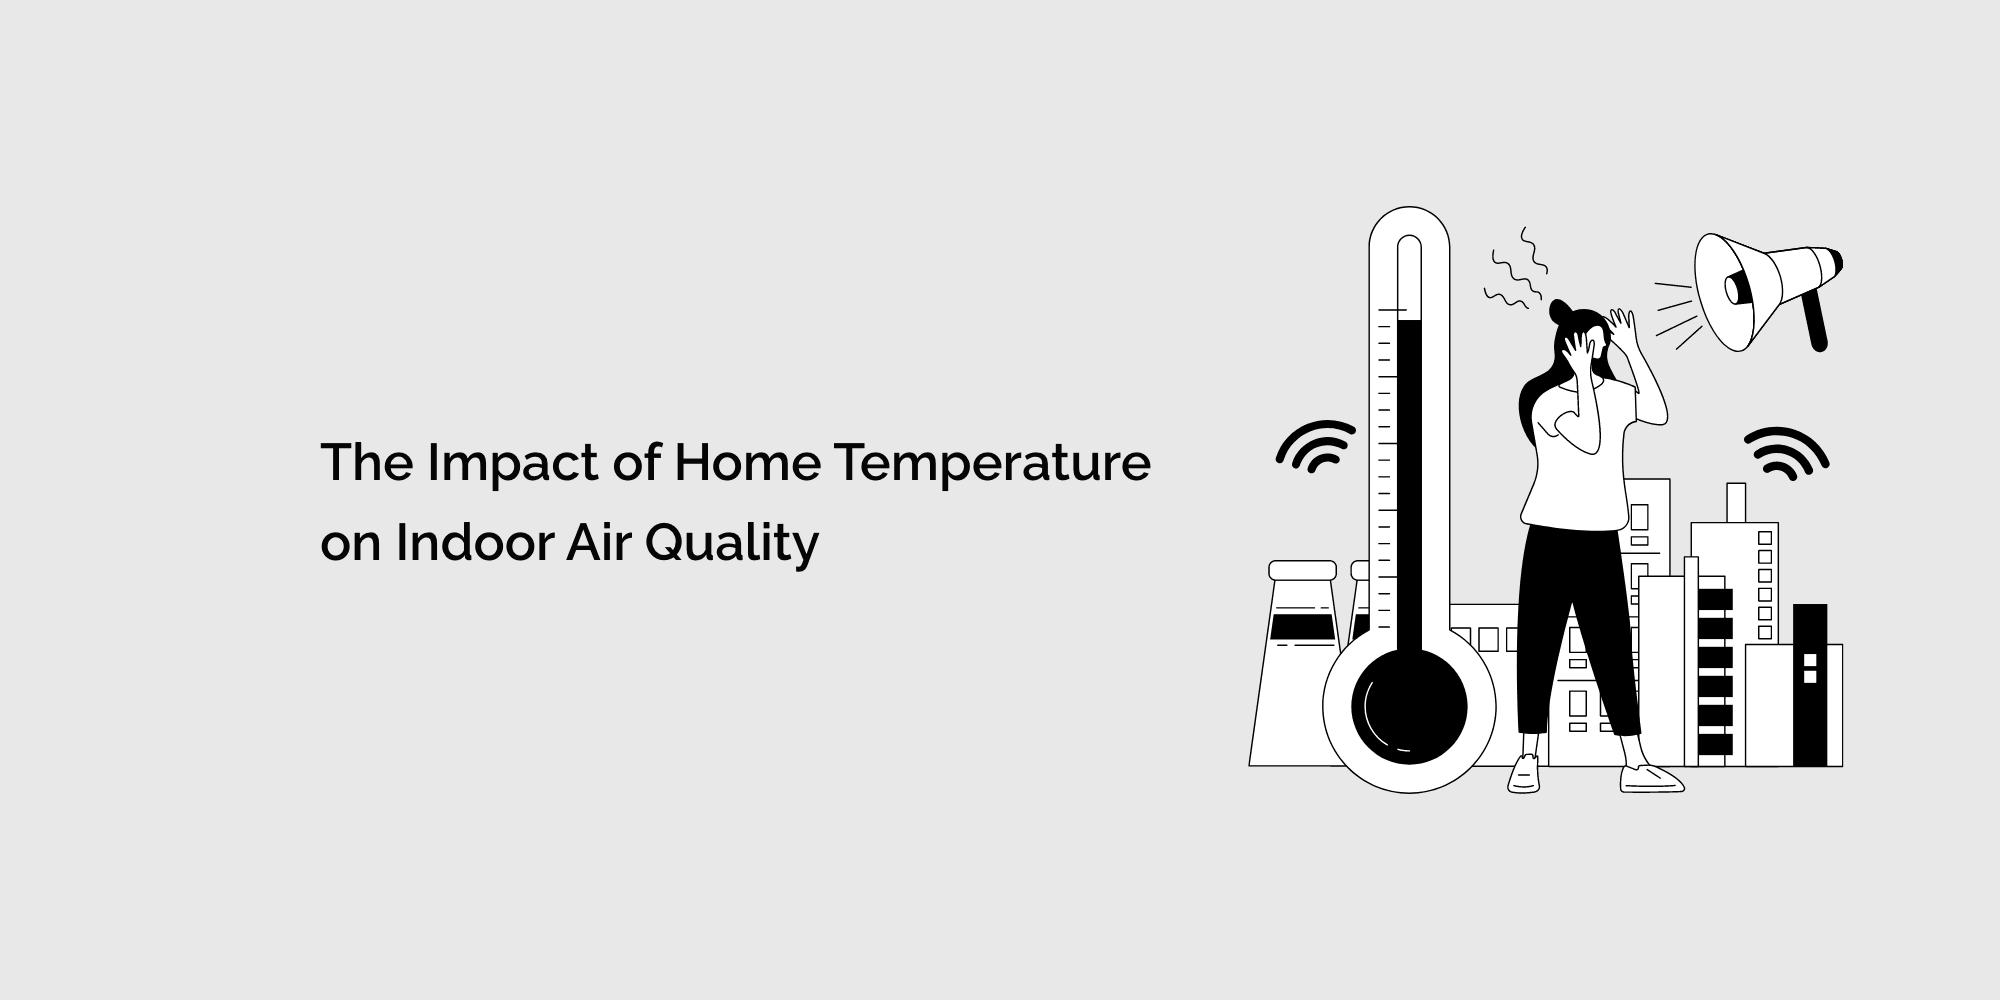 The Impact of Home Temperature on Indoor Air Quality